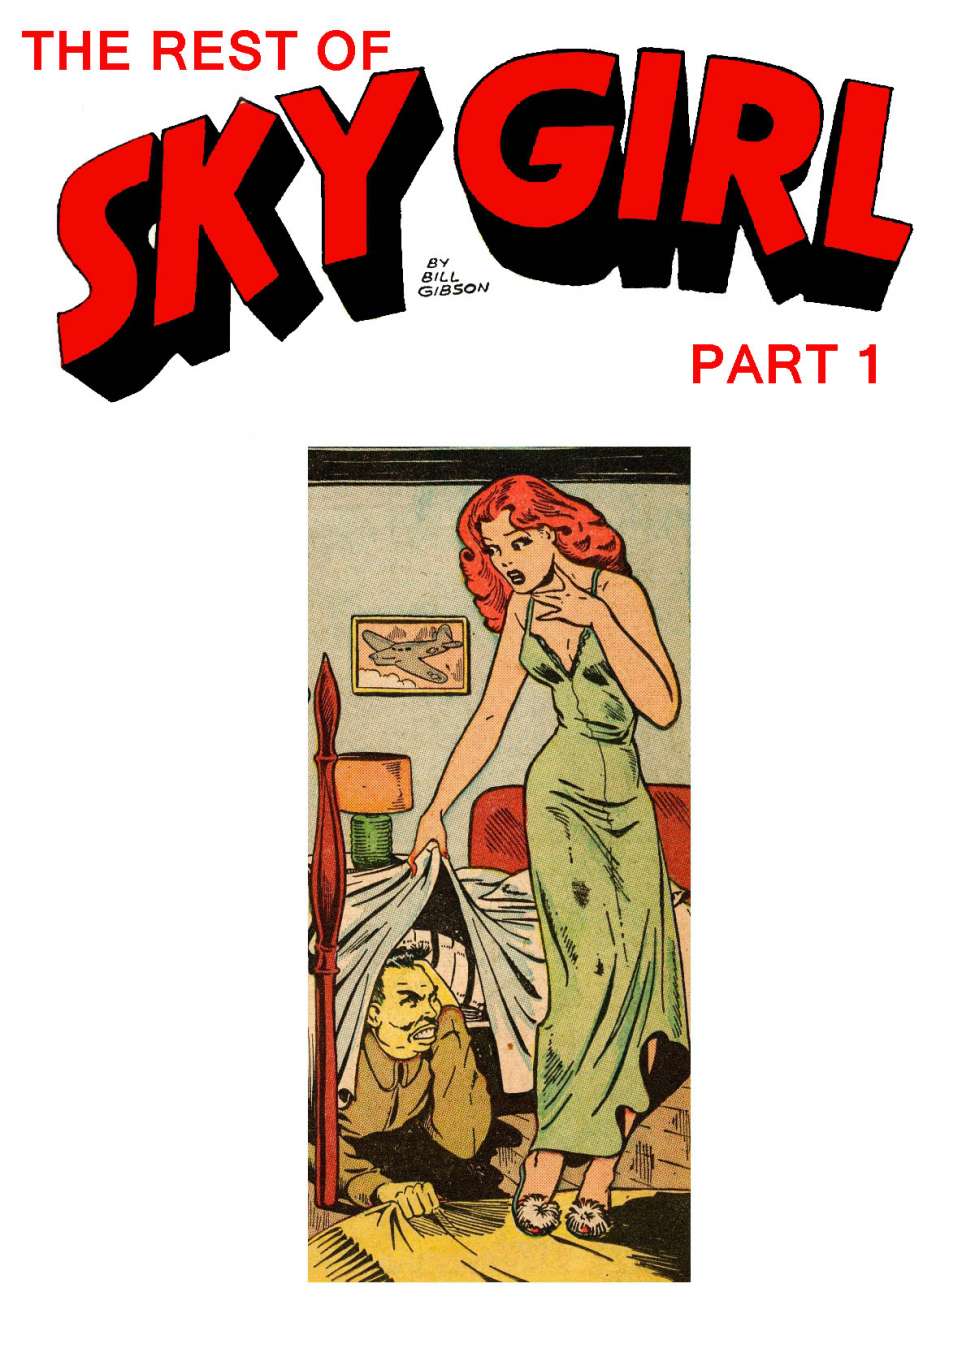 Comic Book Cover For Sky Girl Collection, The Rest of Part 1